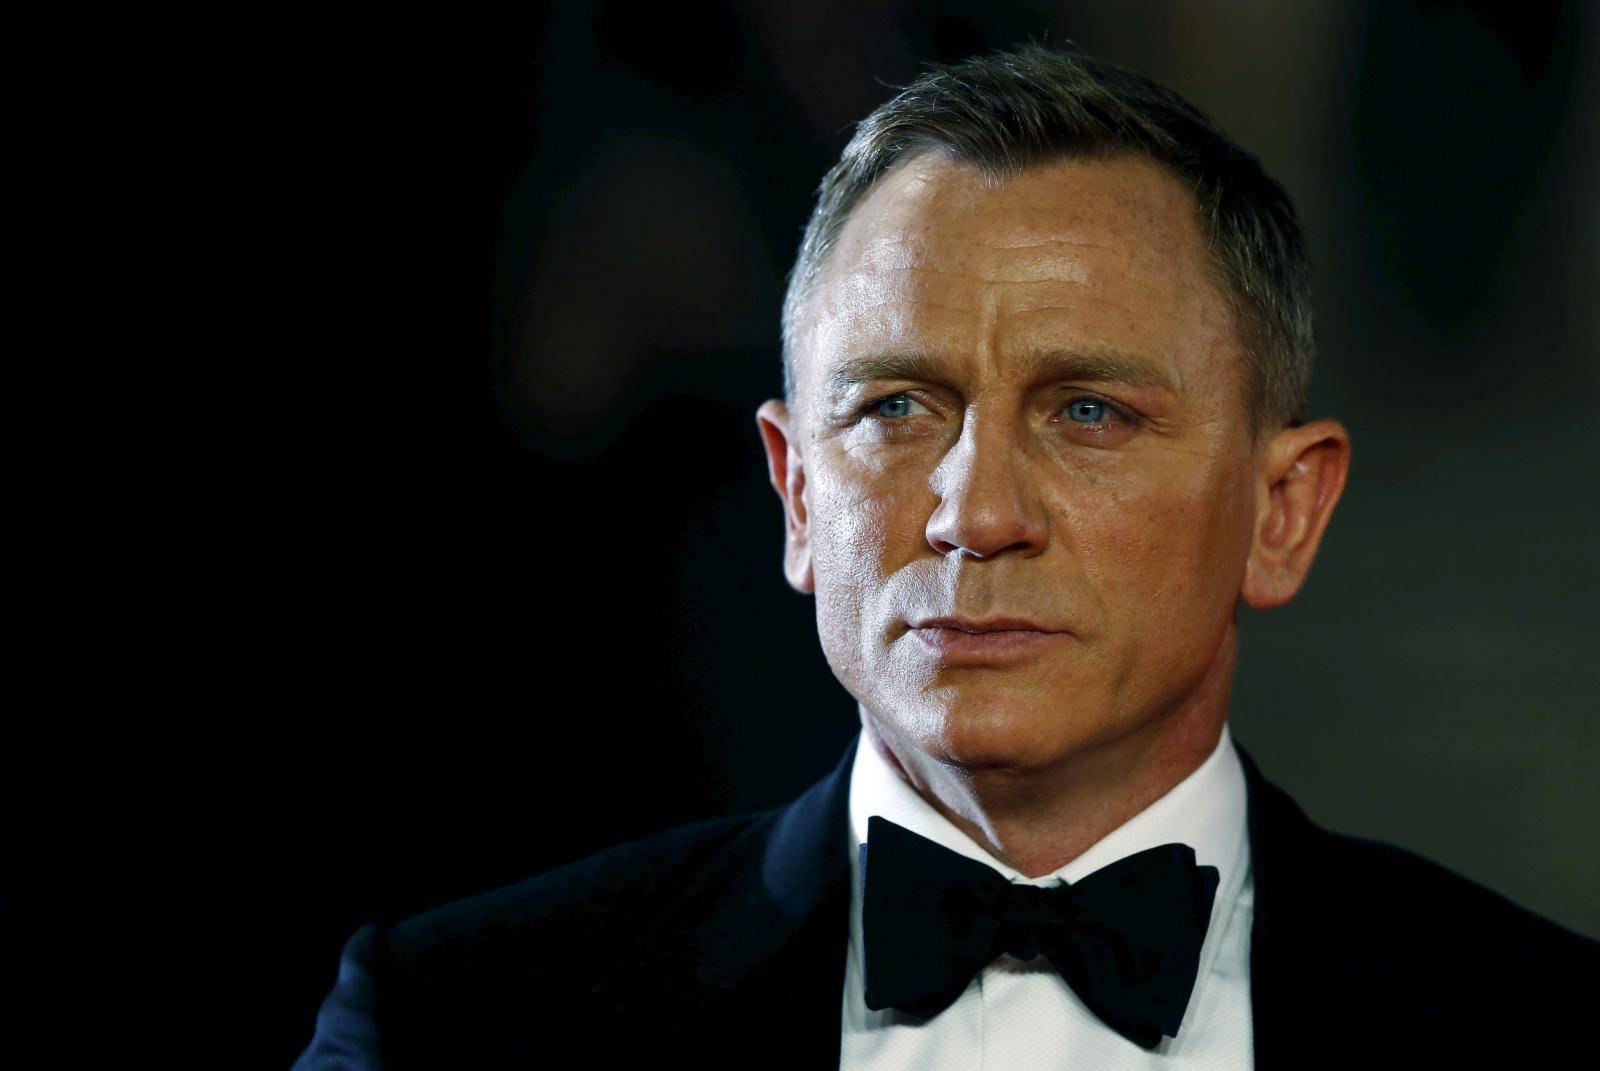 FILE PHOTO: Daniel Craig poses for photographers as he attends the world premiere of the new James Bond 007 film "Spectre" at the Royal Albert Hall in London, Britain